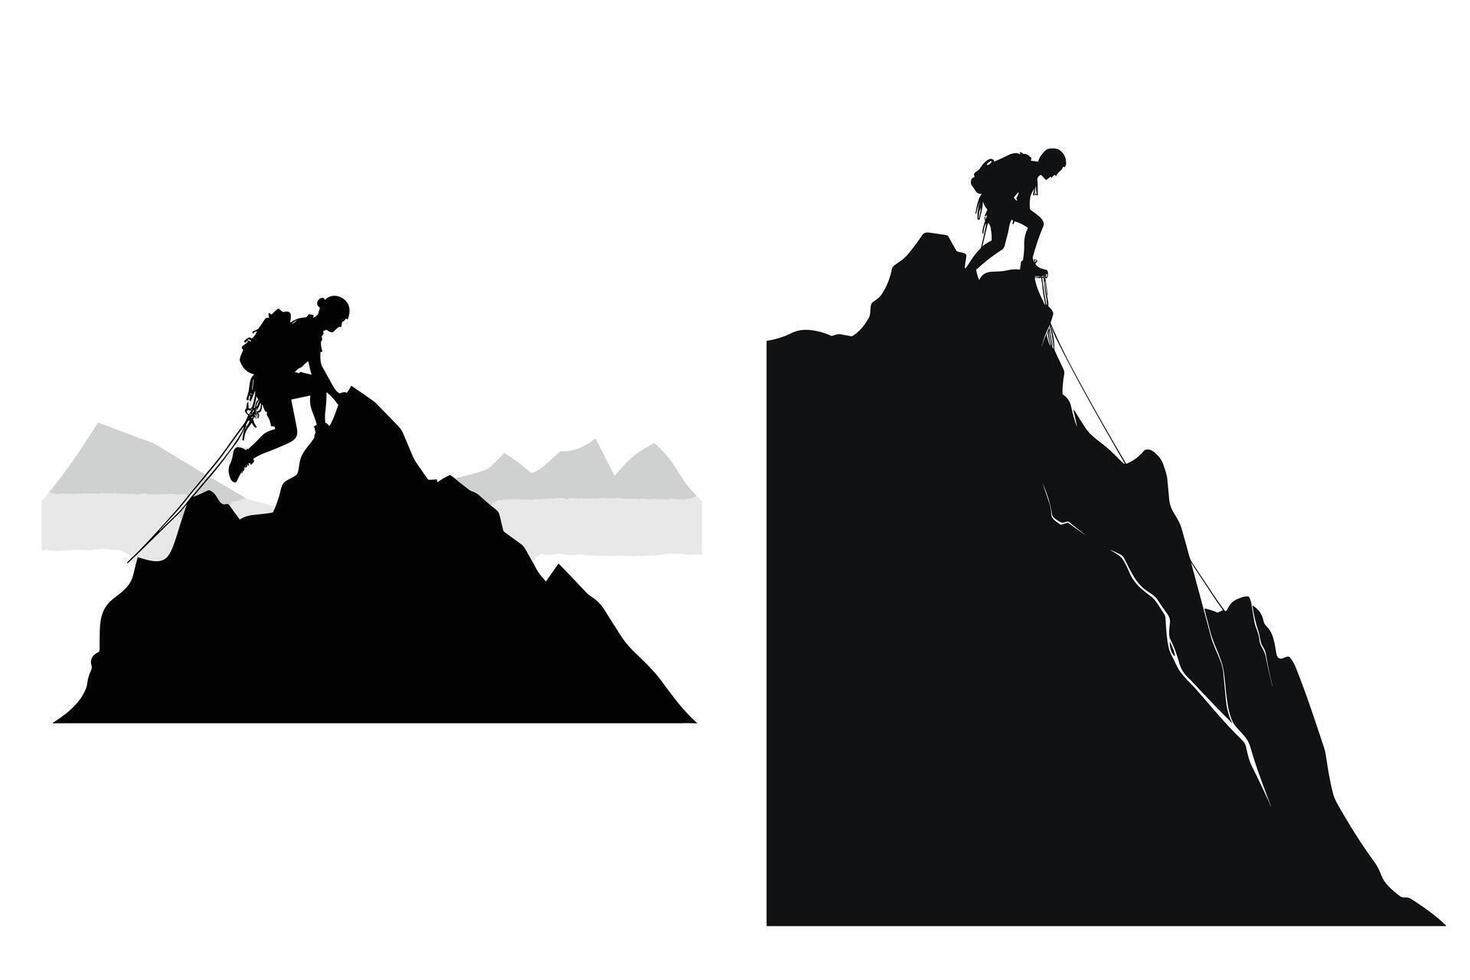 Hiking man climbing silhouette Silhouette of a Man hiking on mountain, hiking climbing silhouette vector